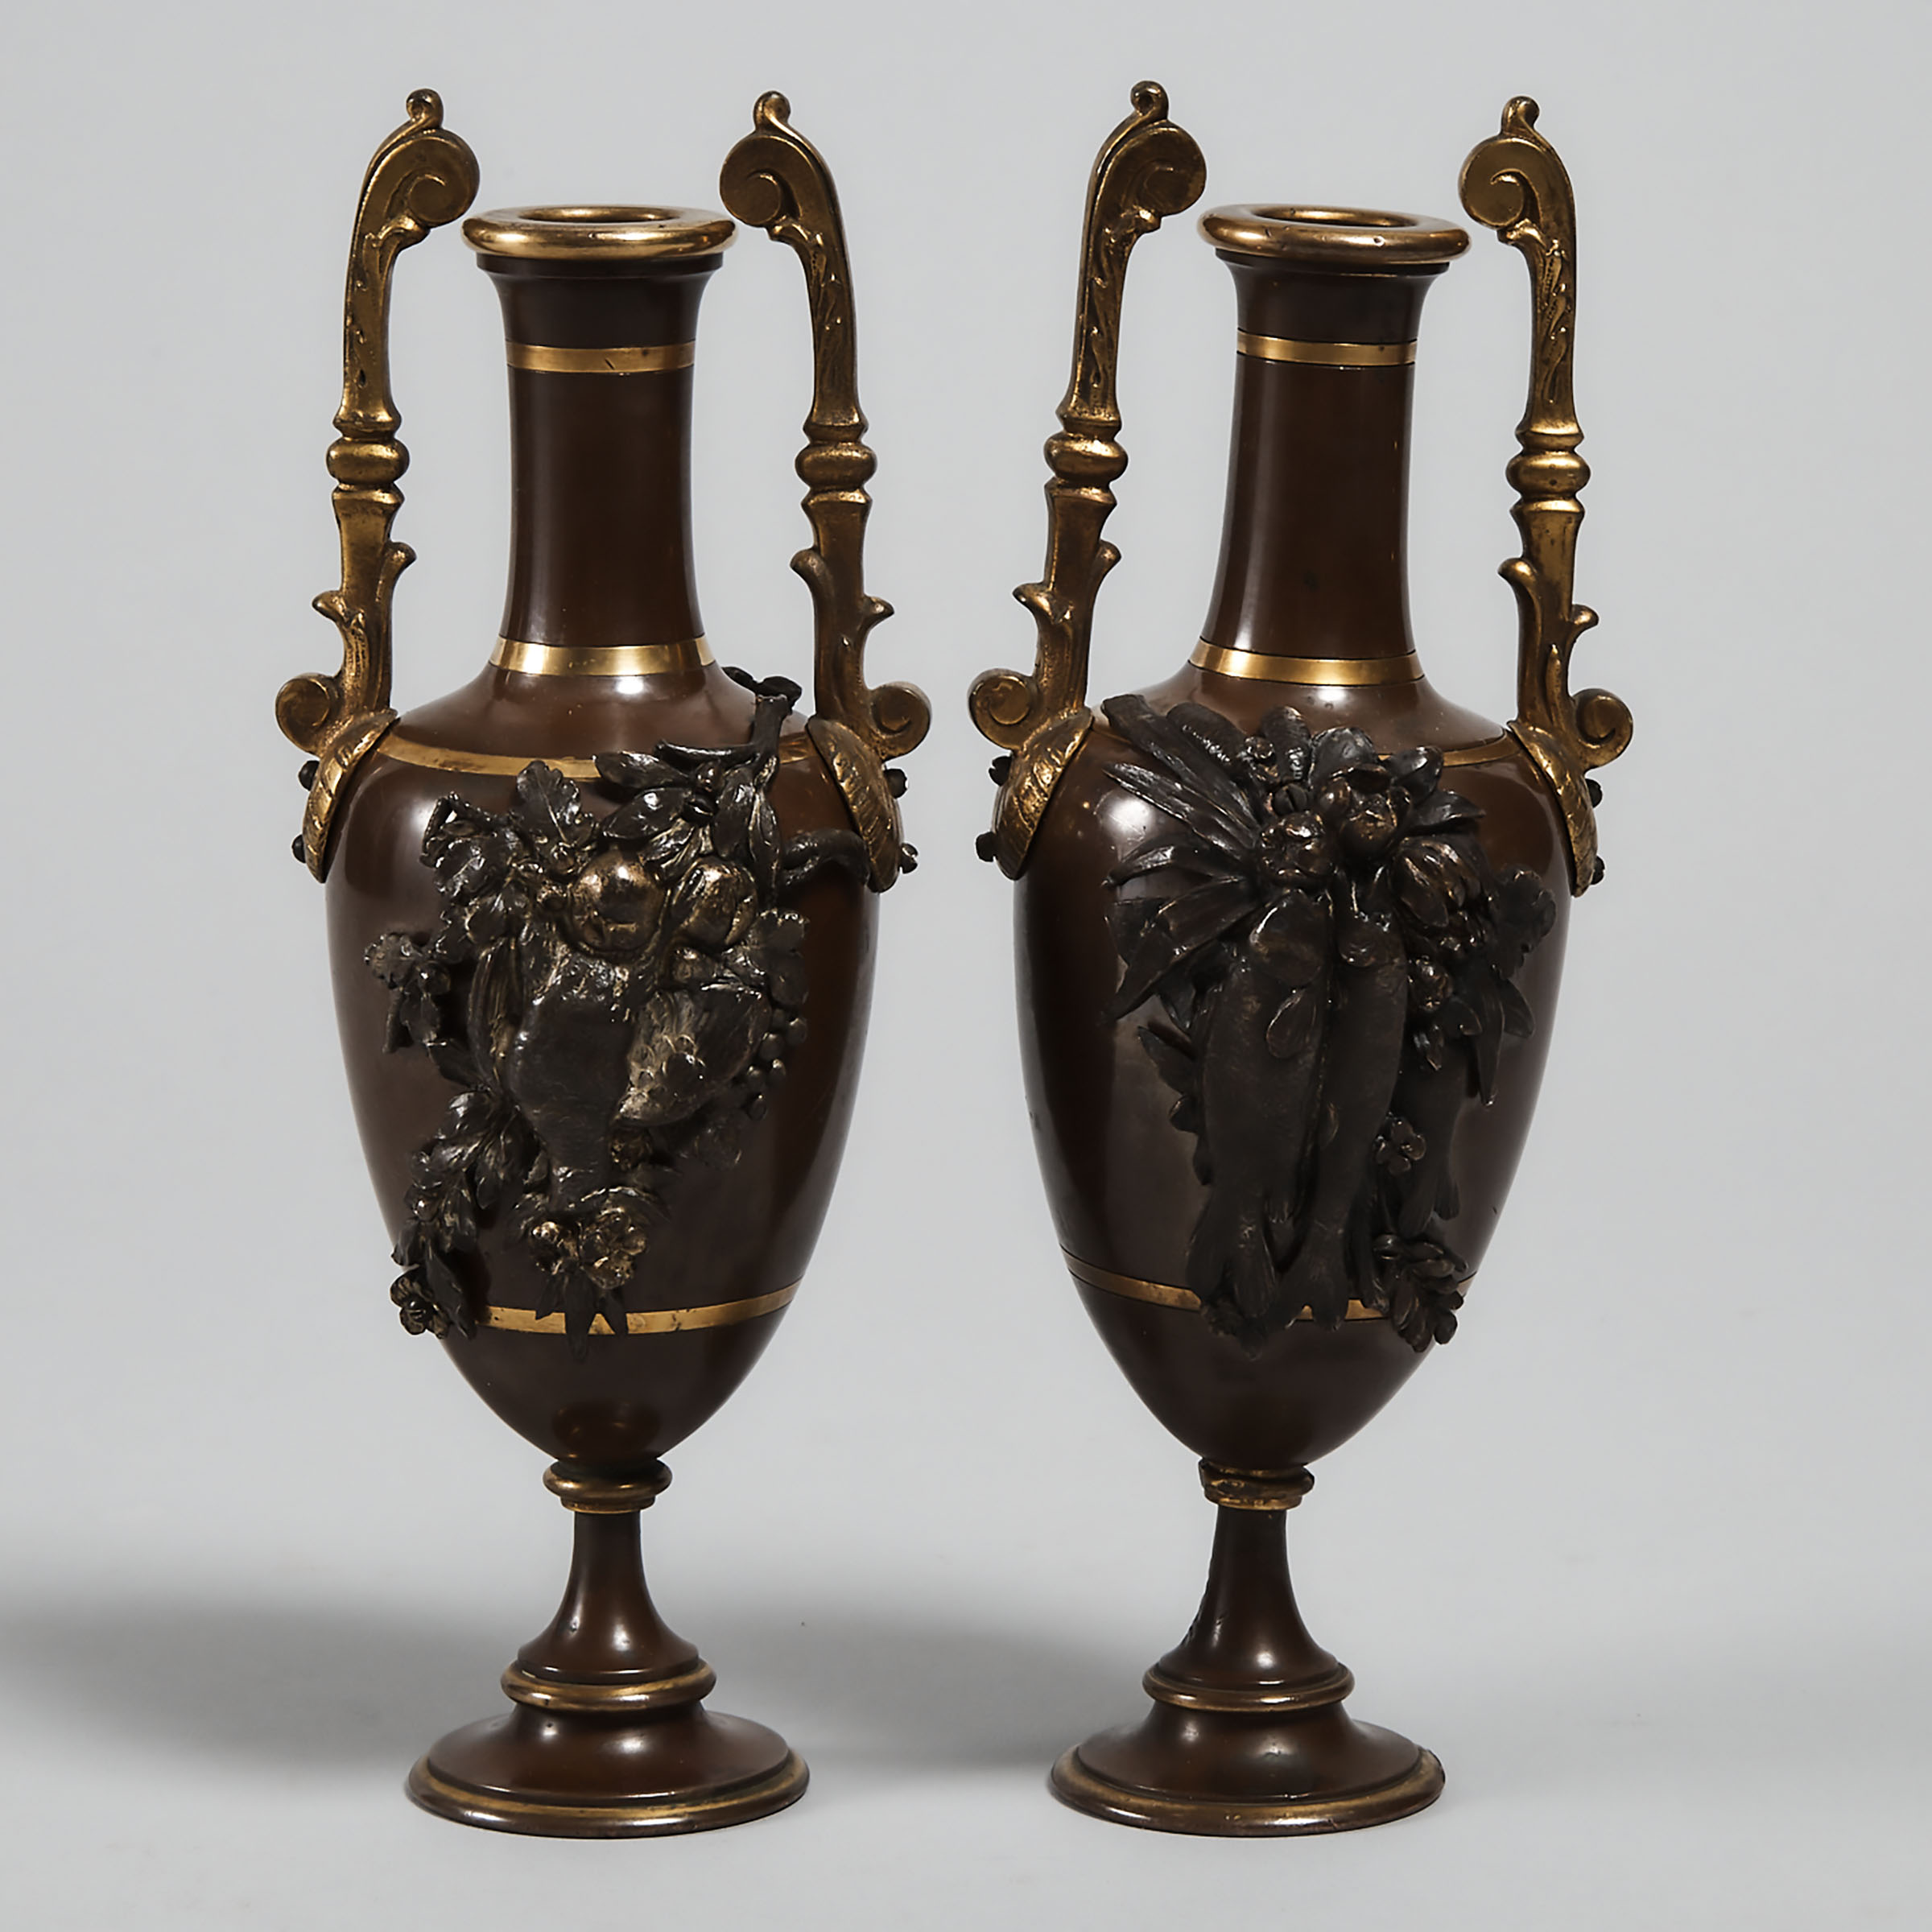 Pair of Small French Patinated Copper and Gilt Metal Mantle Vases, 19th century